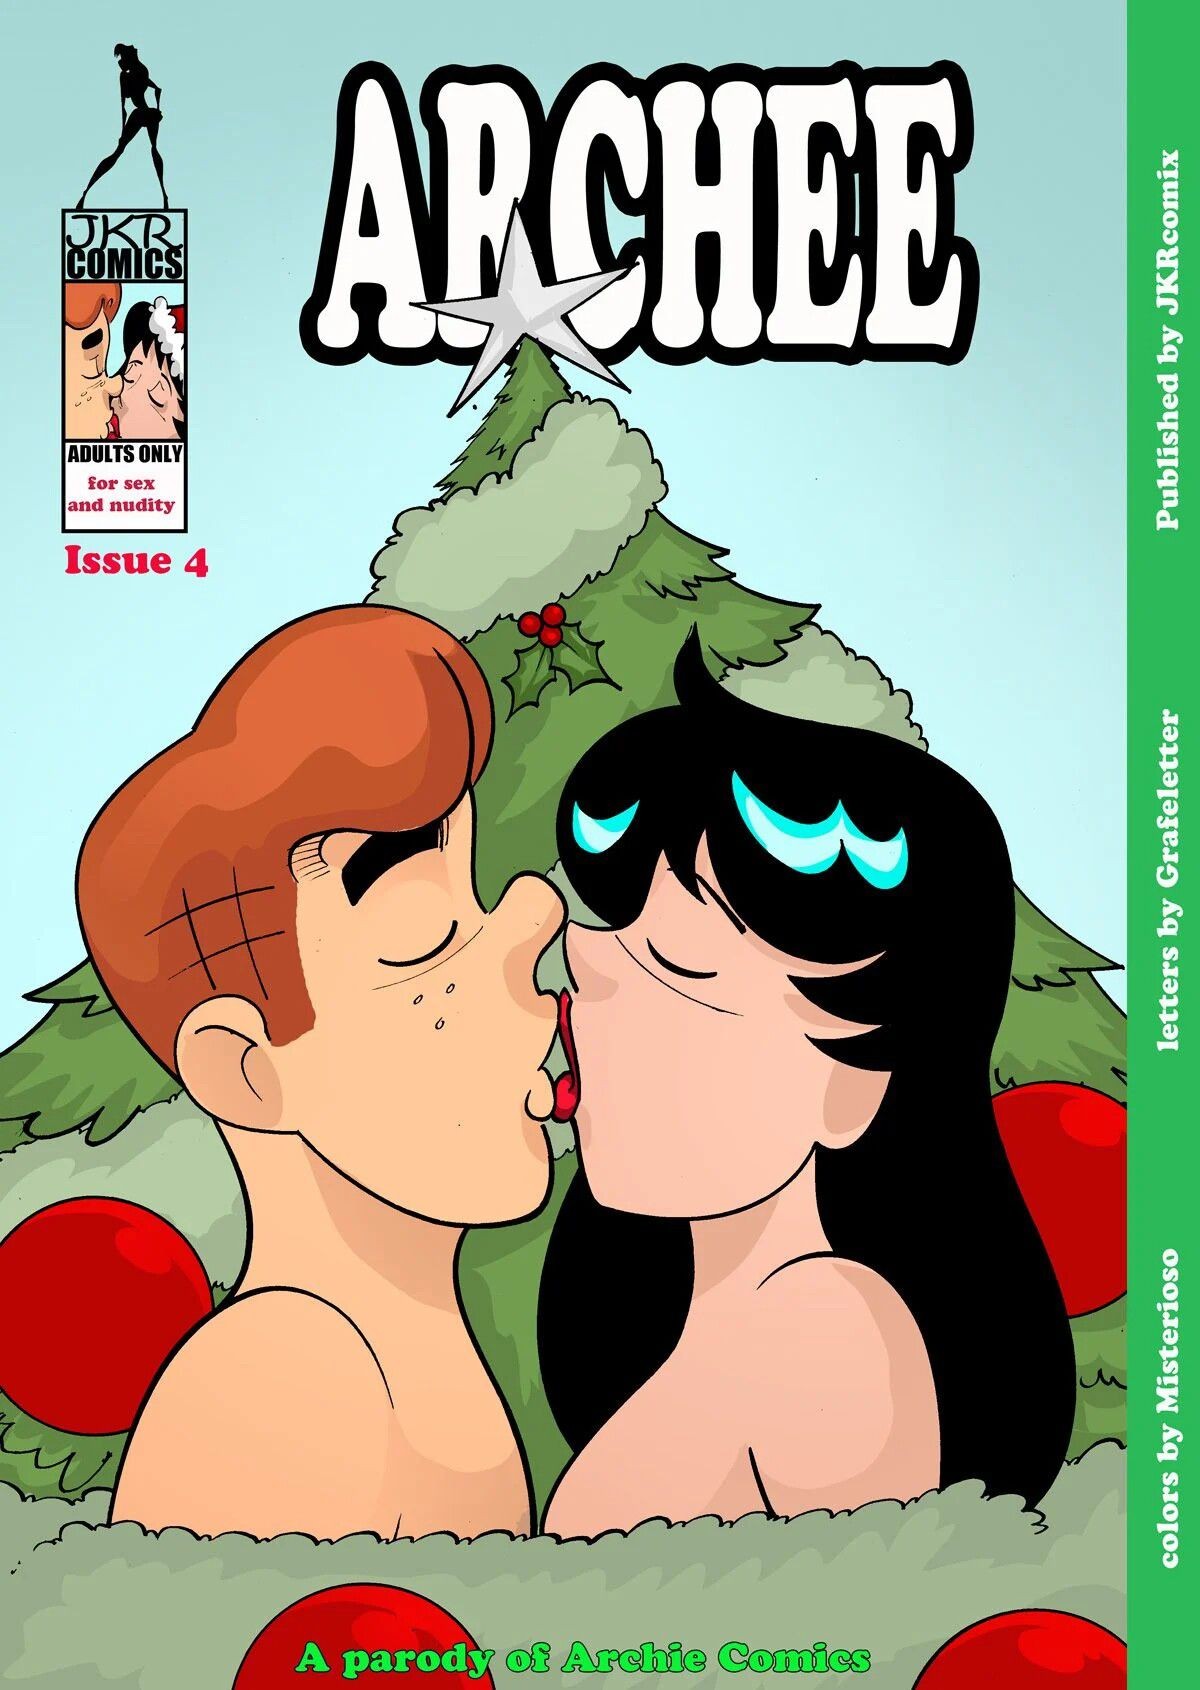 Gay Studs Archee (Archies) [JKRComix] - 4 - English Ngentot